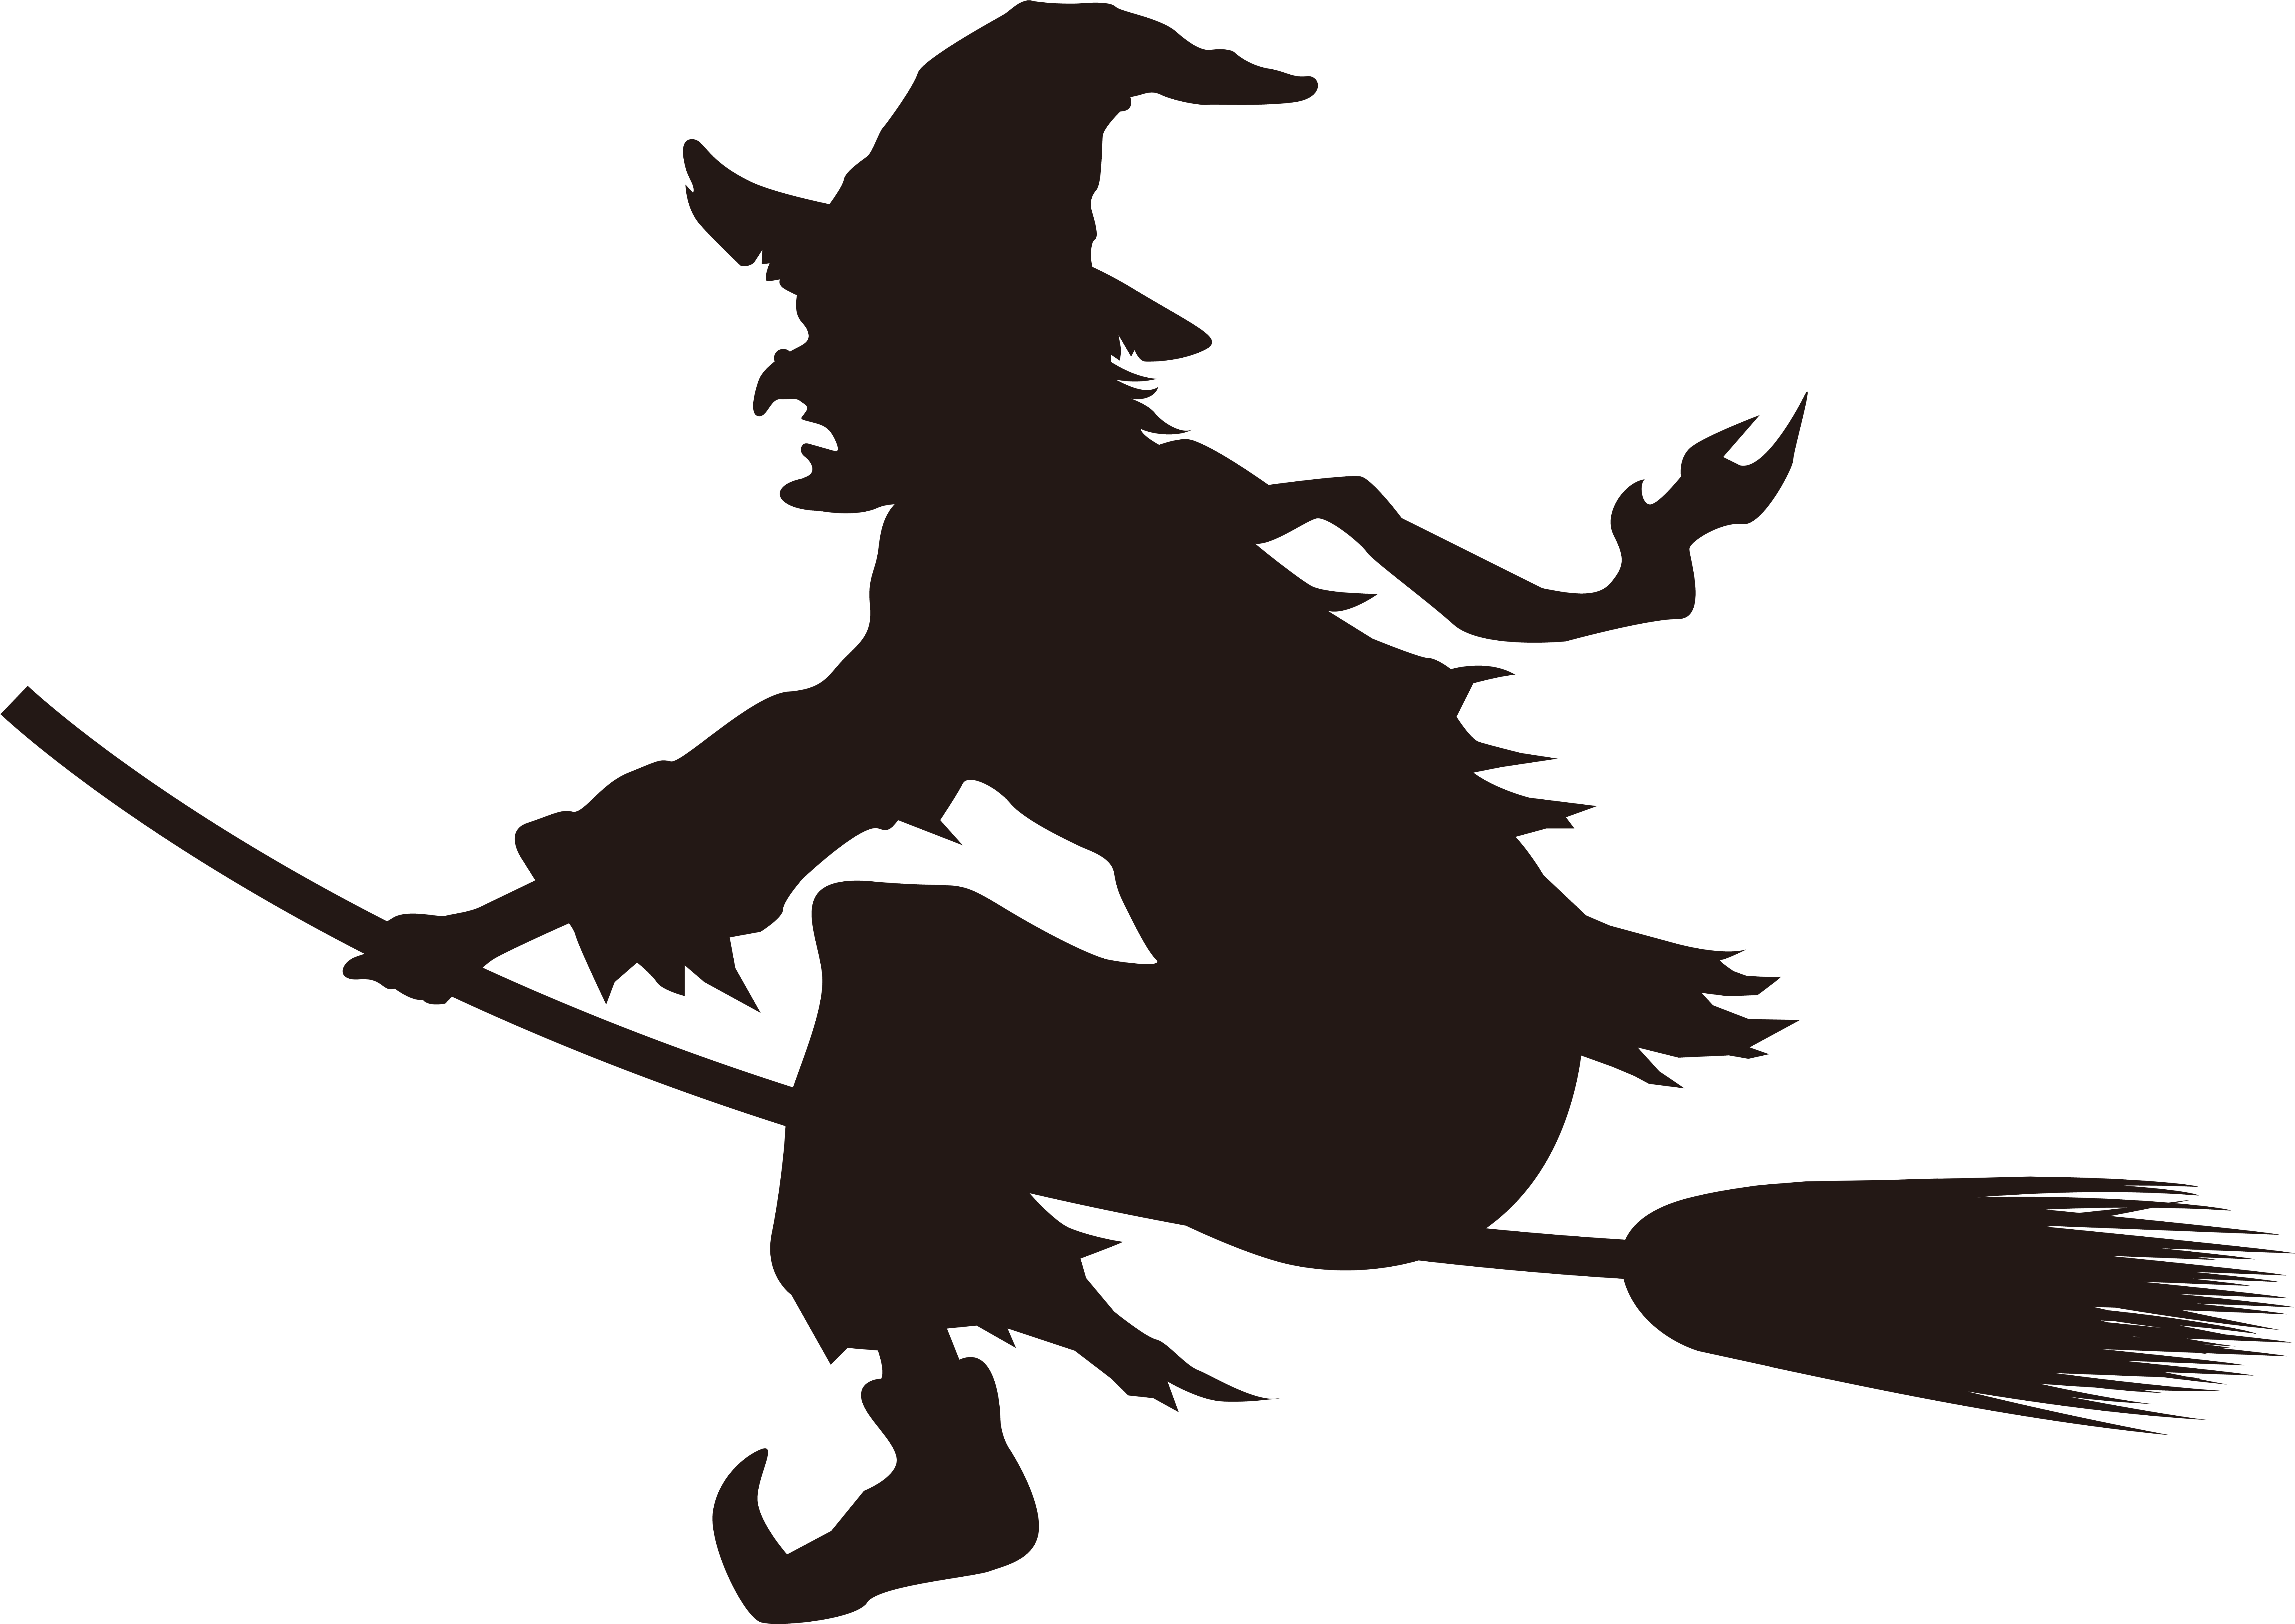 Halloween Witch On Broom Silhouette Png Clip Art Imageu200b - Witch On Broom Silhouette Png (8000x5637)